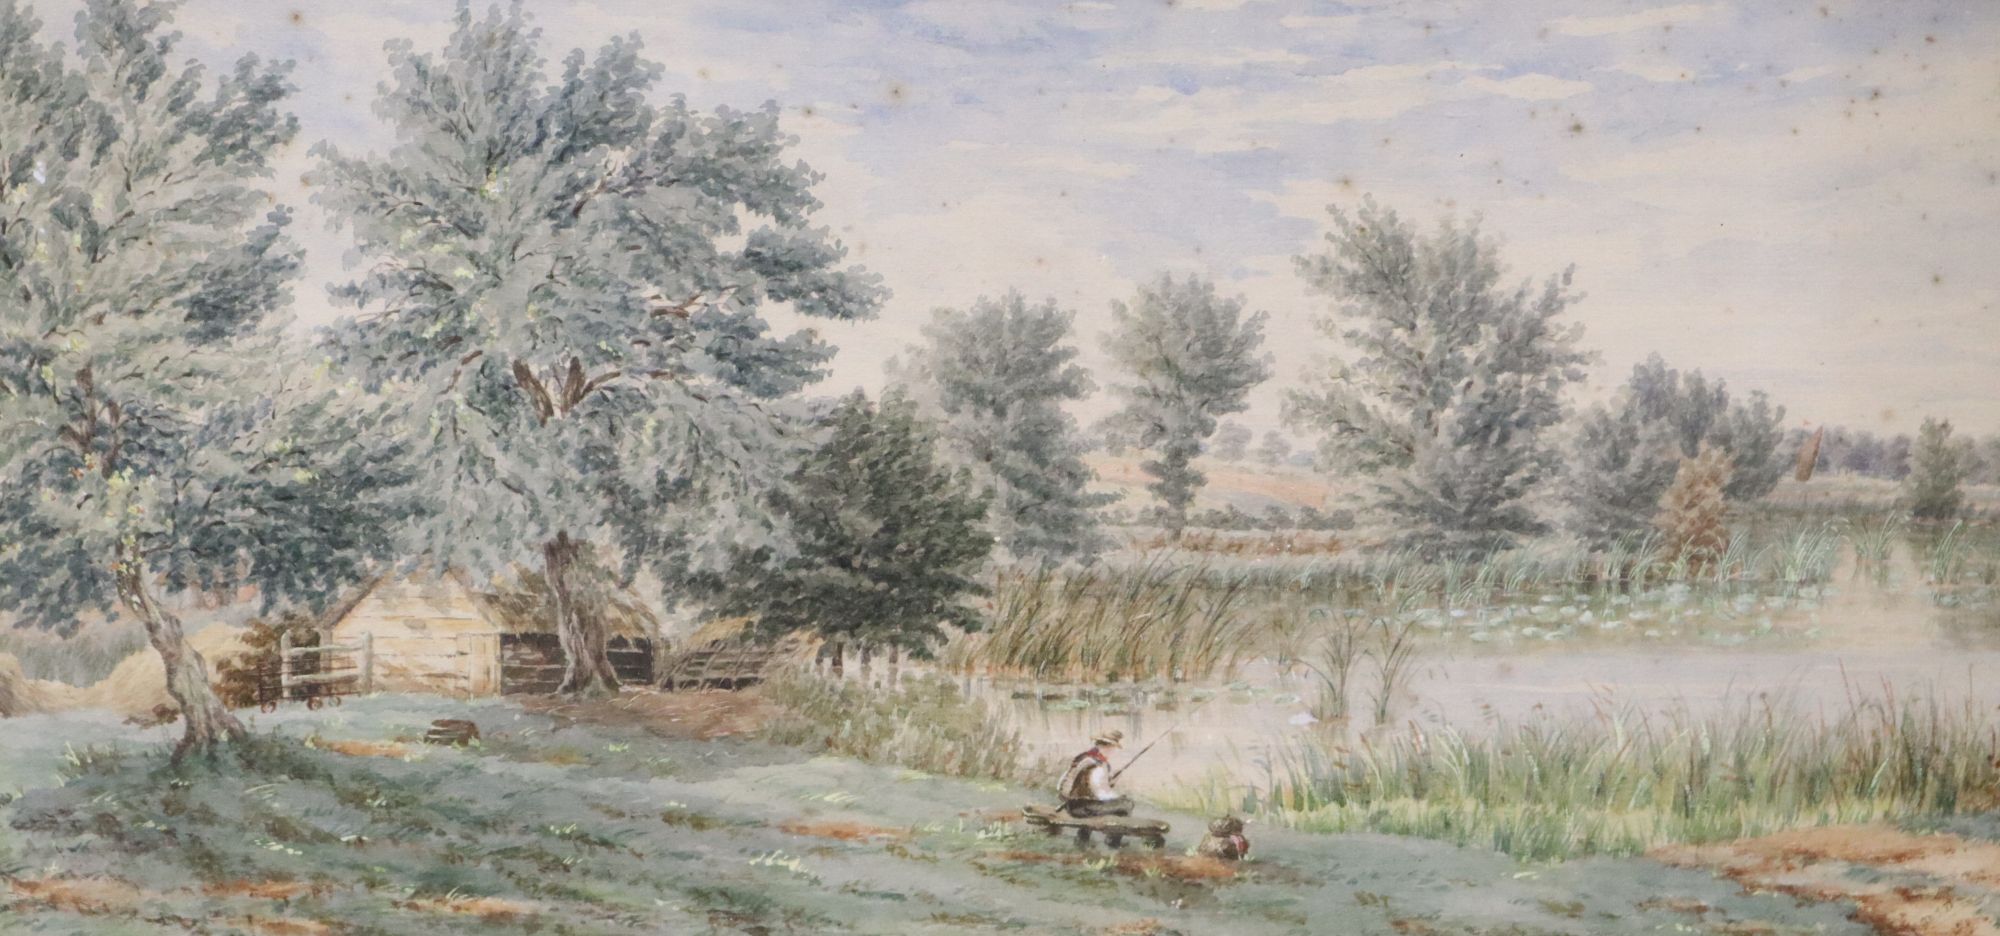 English School c.1900, watercolour, Angler in a landscape, initialled lower right, 22 x 45cm